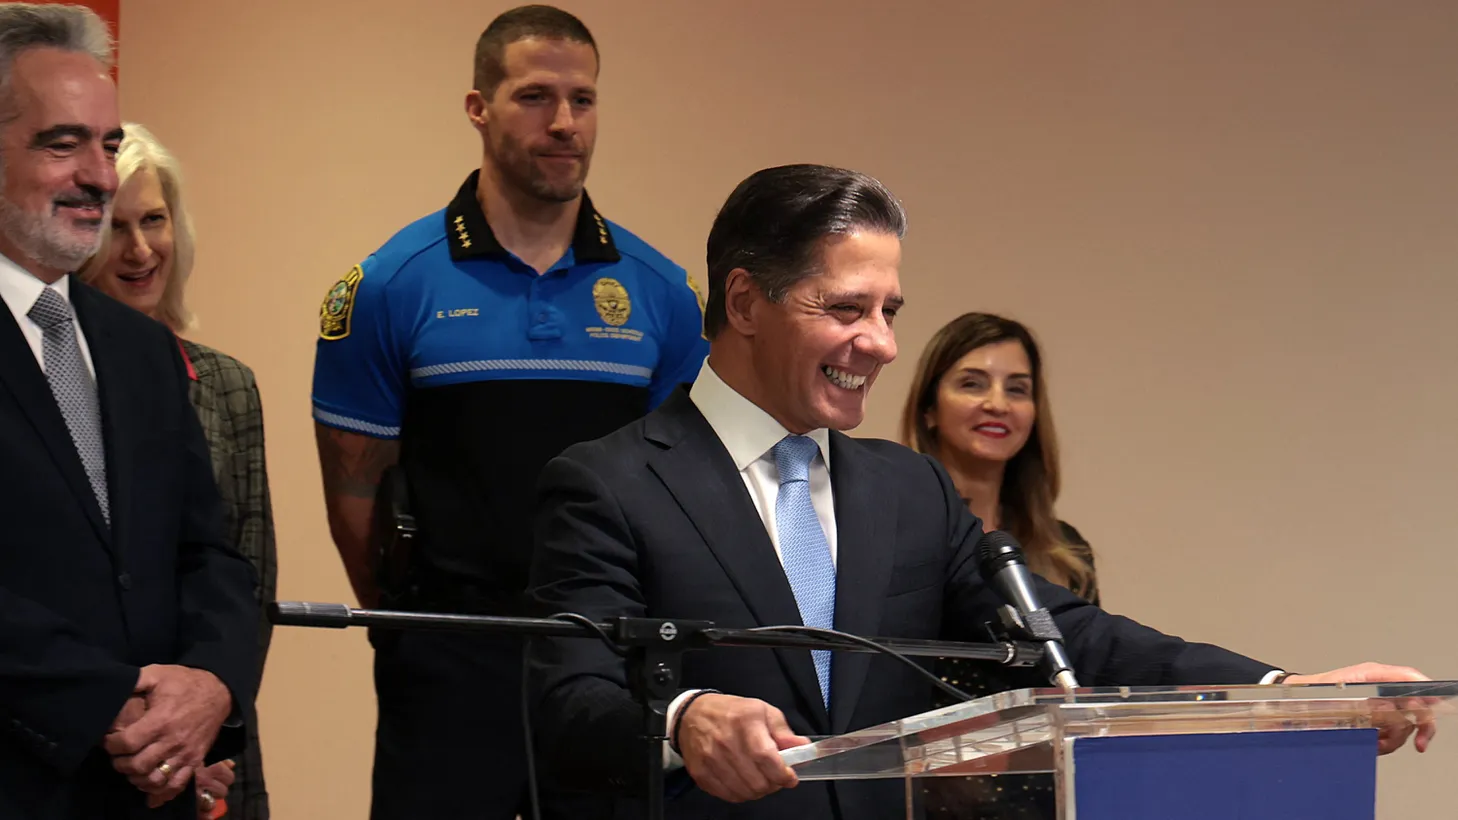 Alberto Carvalho takes "a punt" and smiles after being asked which basketball team he will now support, the Miami Heat or the Los Angeles Lakers, on Dec. 9, 2021. The exiting Miami-Dade Public Schools leader announced his departure for Los Angeles as its new superintendent during a press conference at iPrep Academy in Miami.